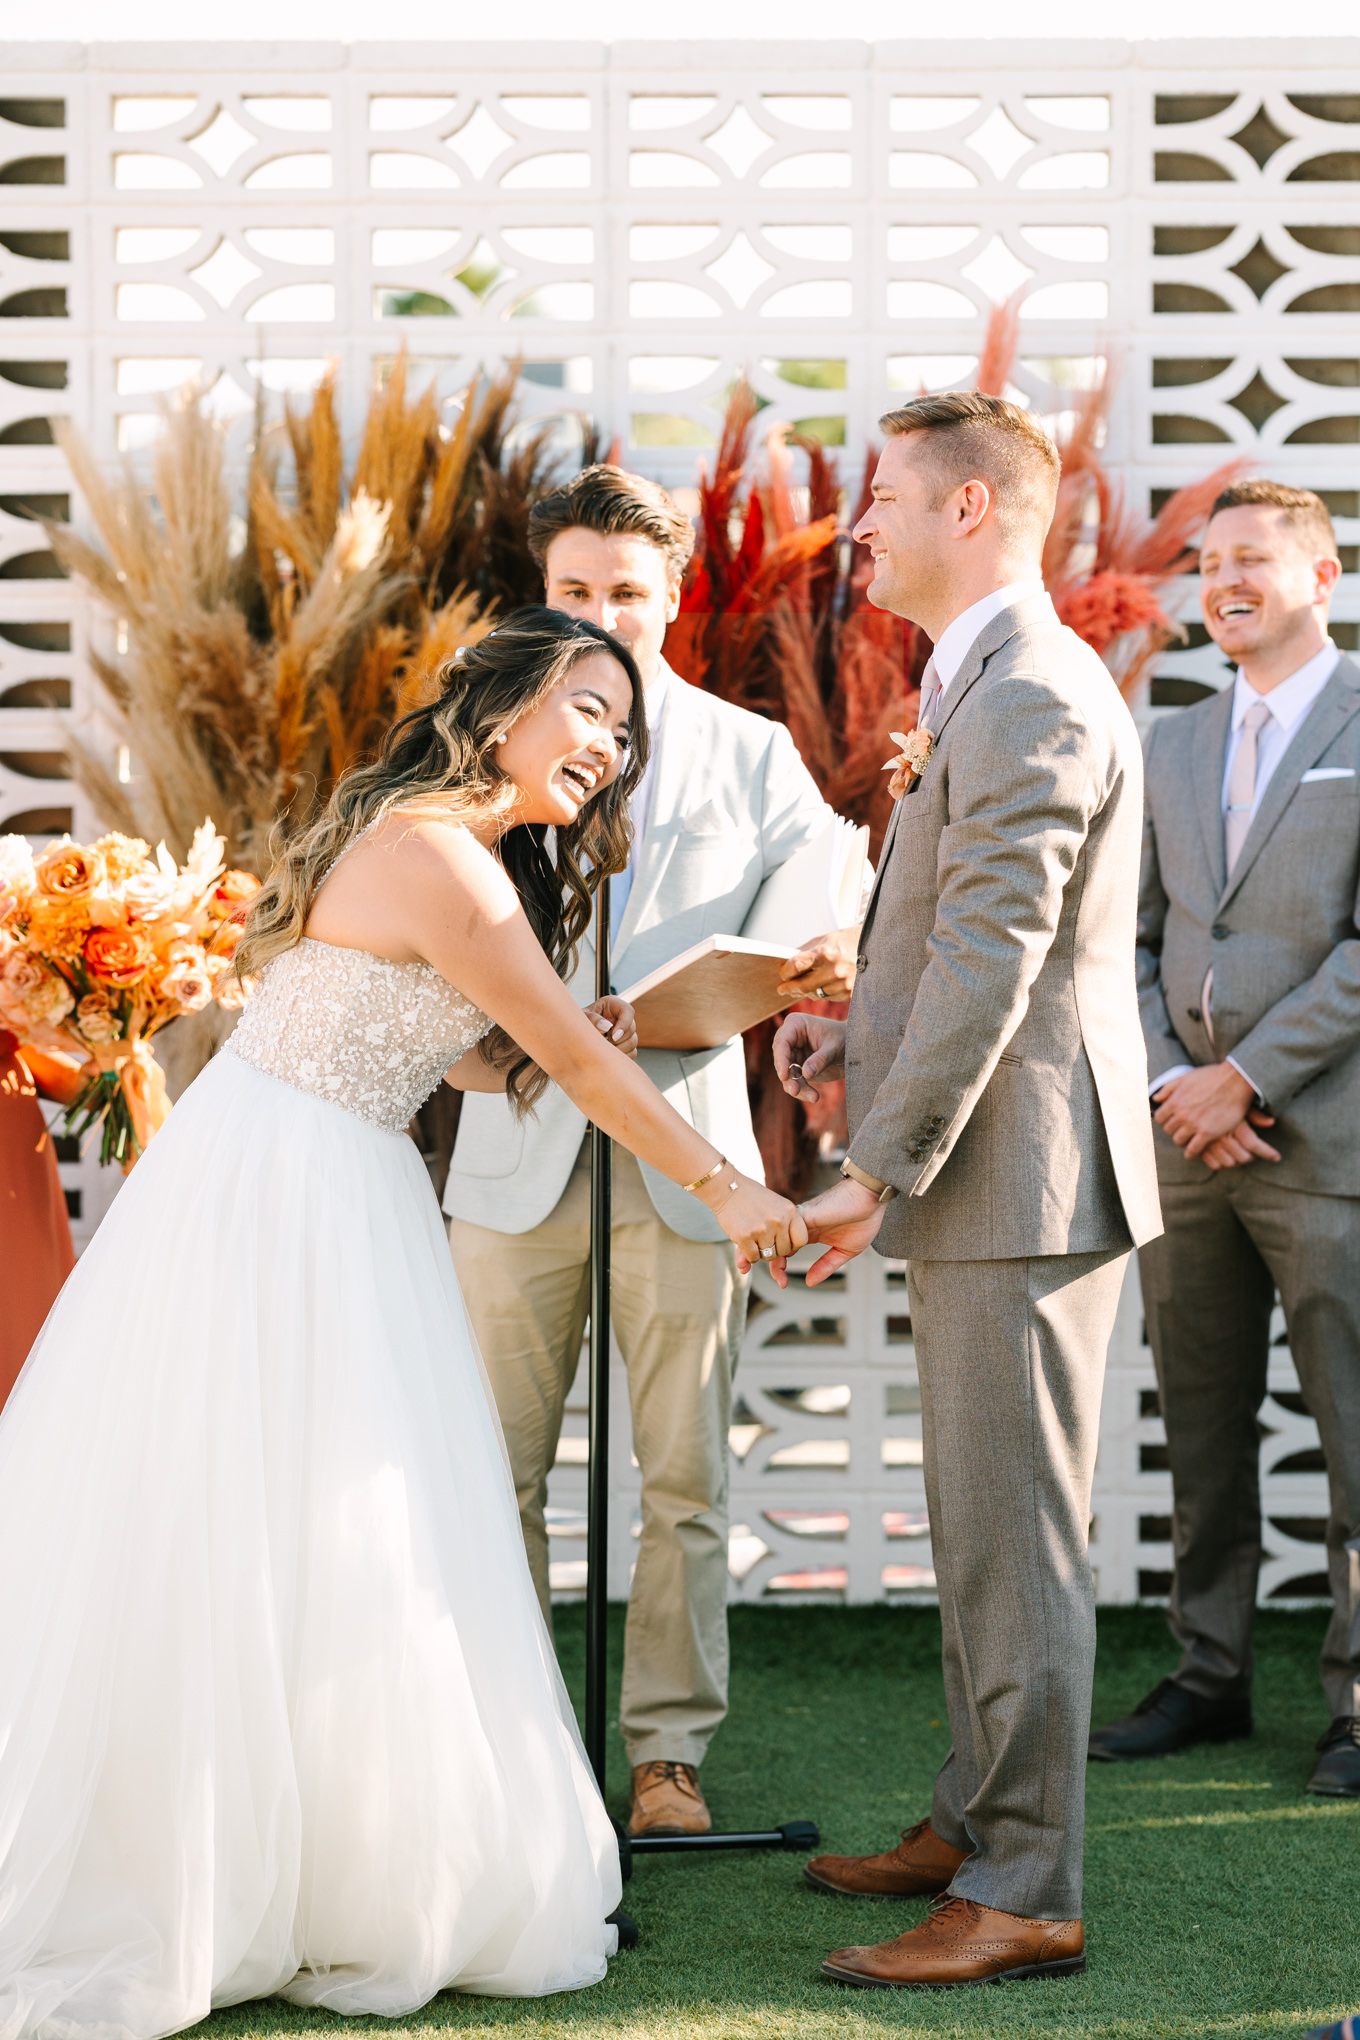 Bride laughing at wedding ceremony | Pink and orange Lautner Compound wedding | Colorful Palm Springs wedding photography | #palmspringsphotographer #palmspringswedding #lautnercompound #southerncaliforniawedding  Source: Mary Costa Photography | Los Angeles